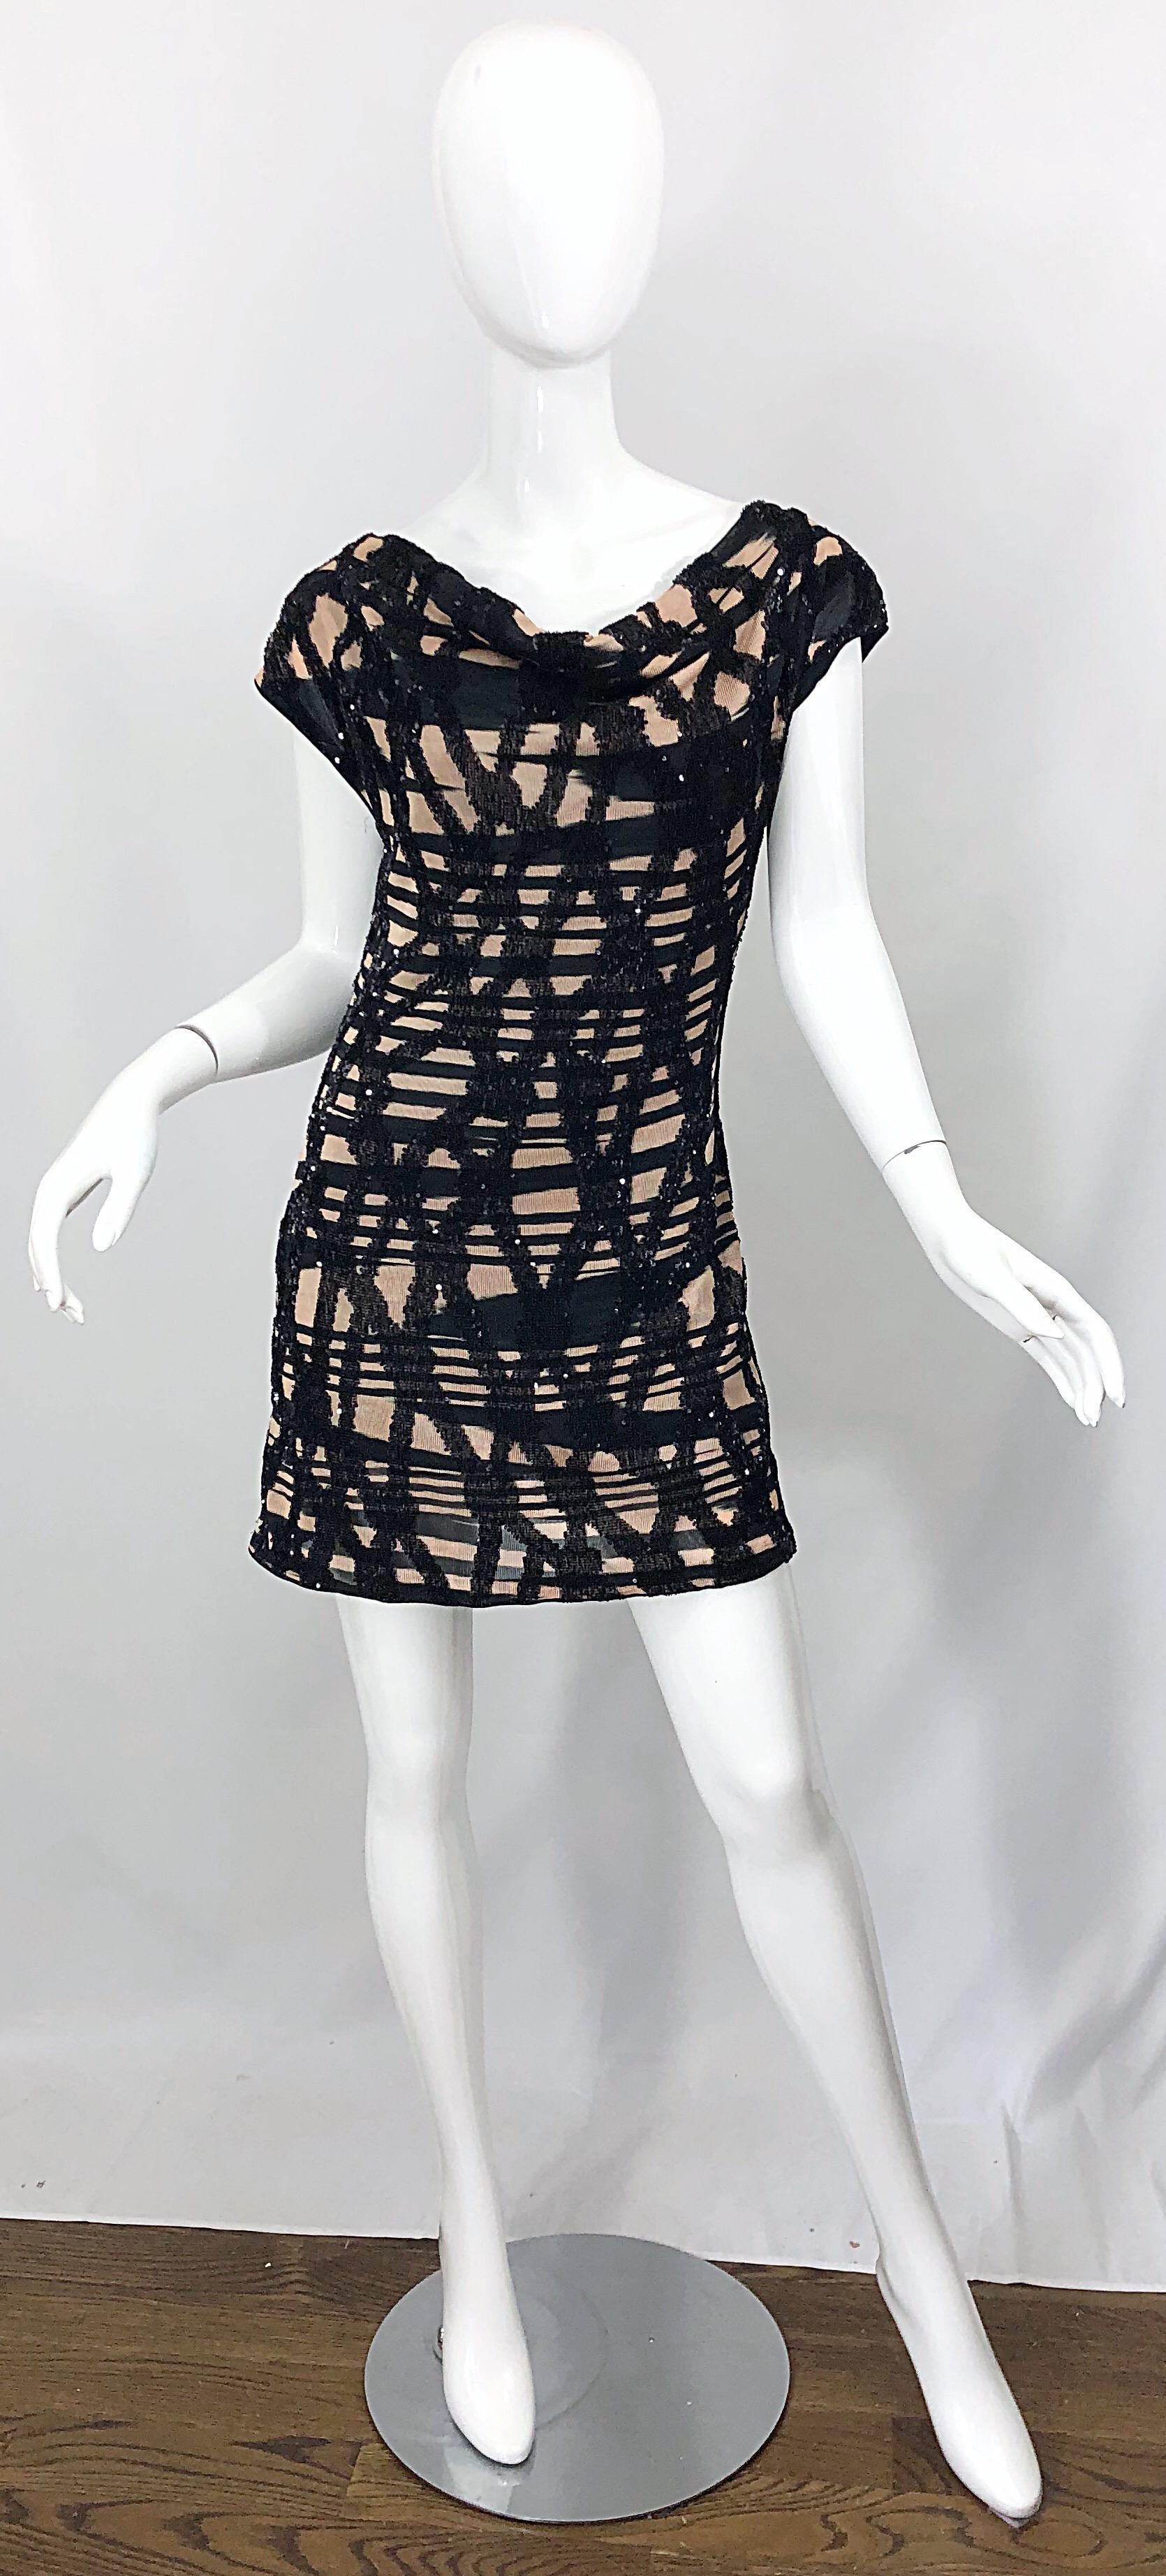 Missoni Early 2000s Black + Nude Sequined Size 40 / 4 - 6 Abstract Mini Dress For Sale 5